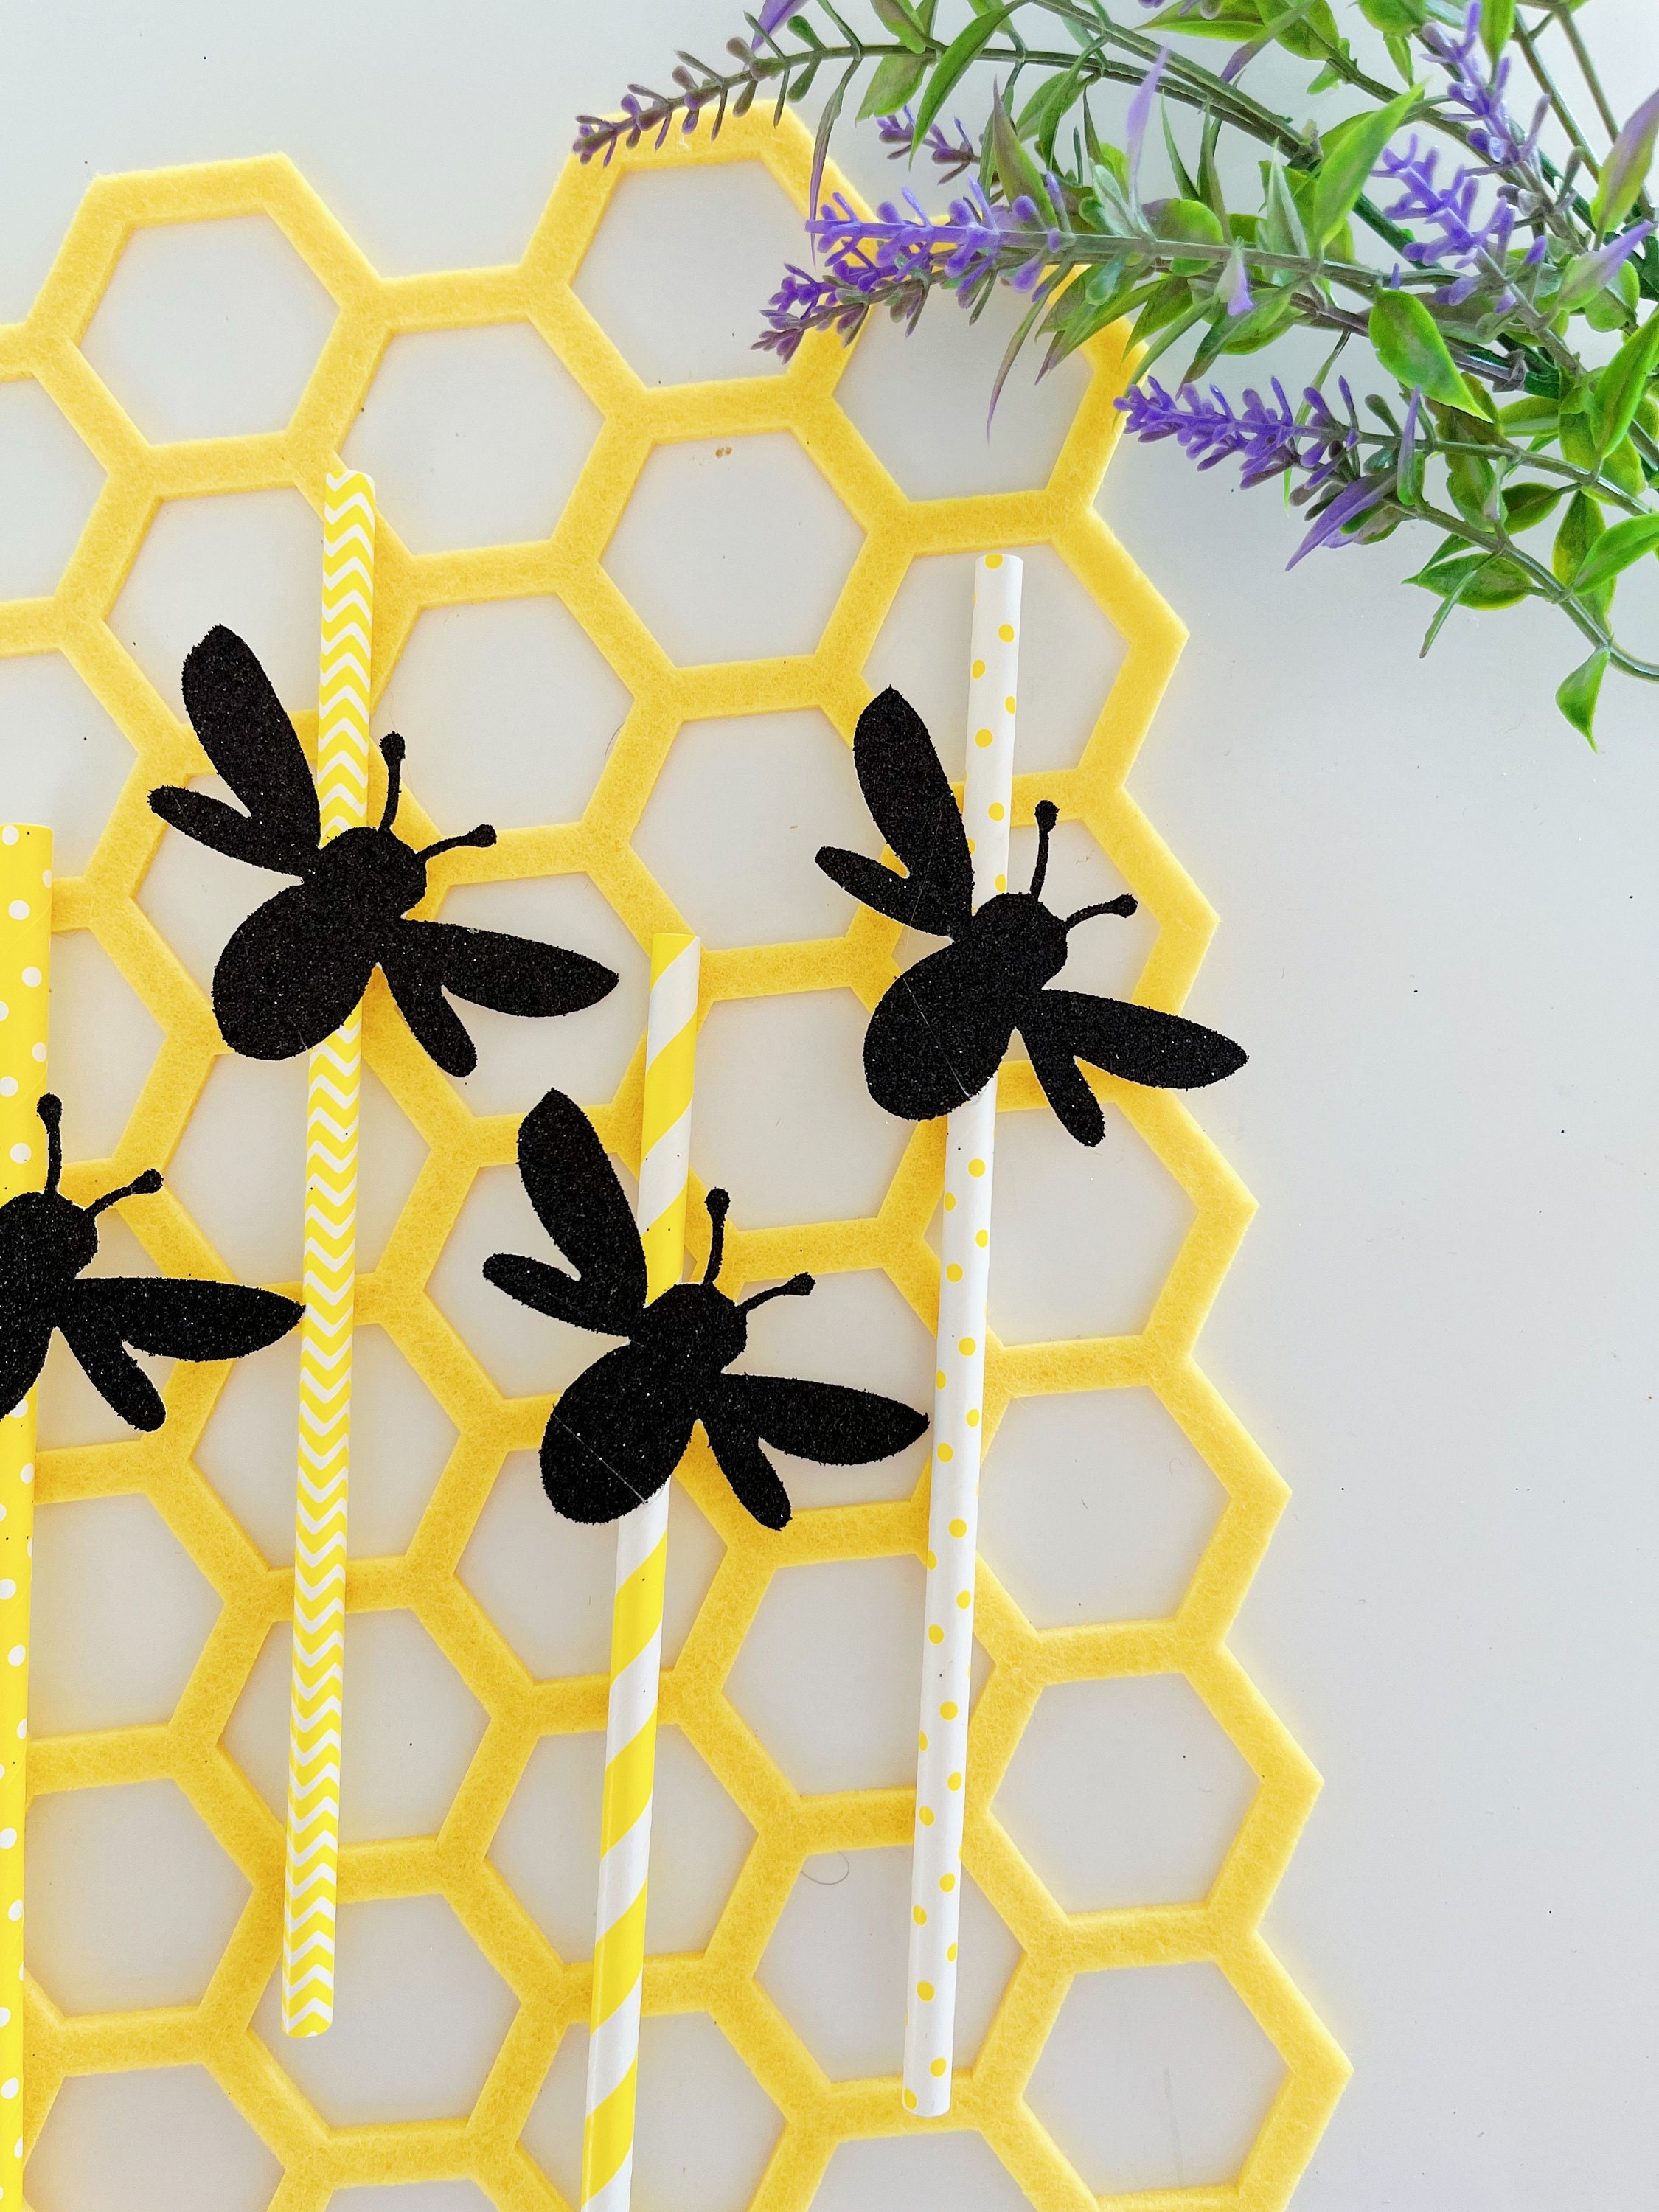 Bumble Bee Straw Topper – Glitter and Crafts 4U